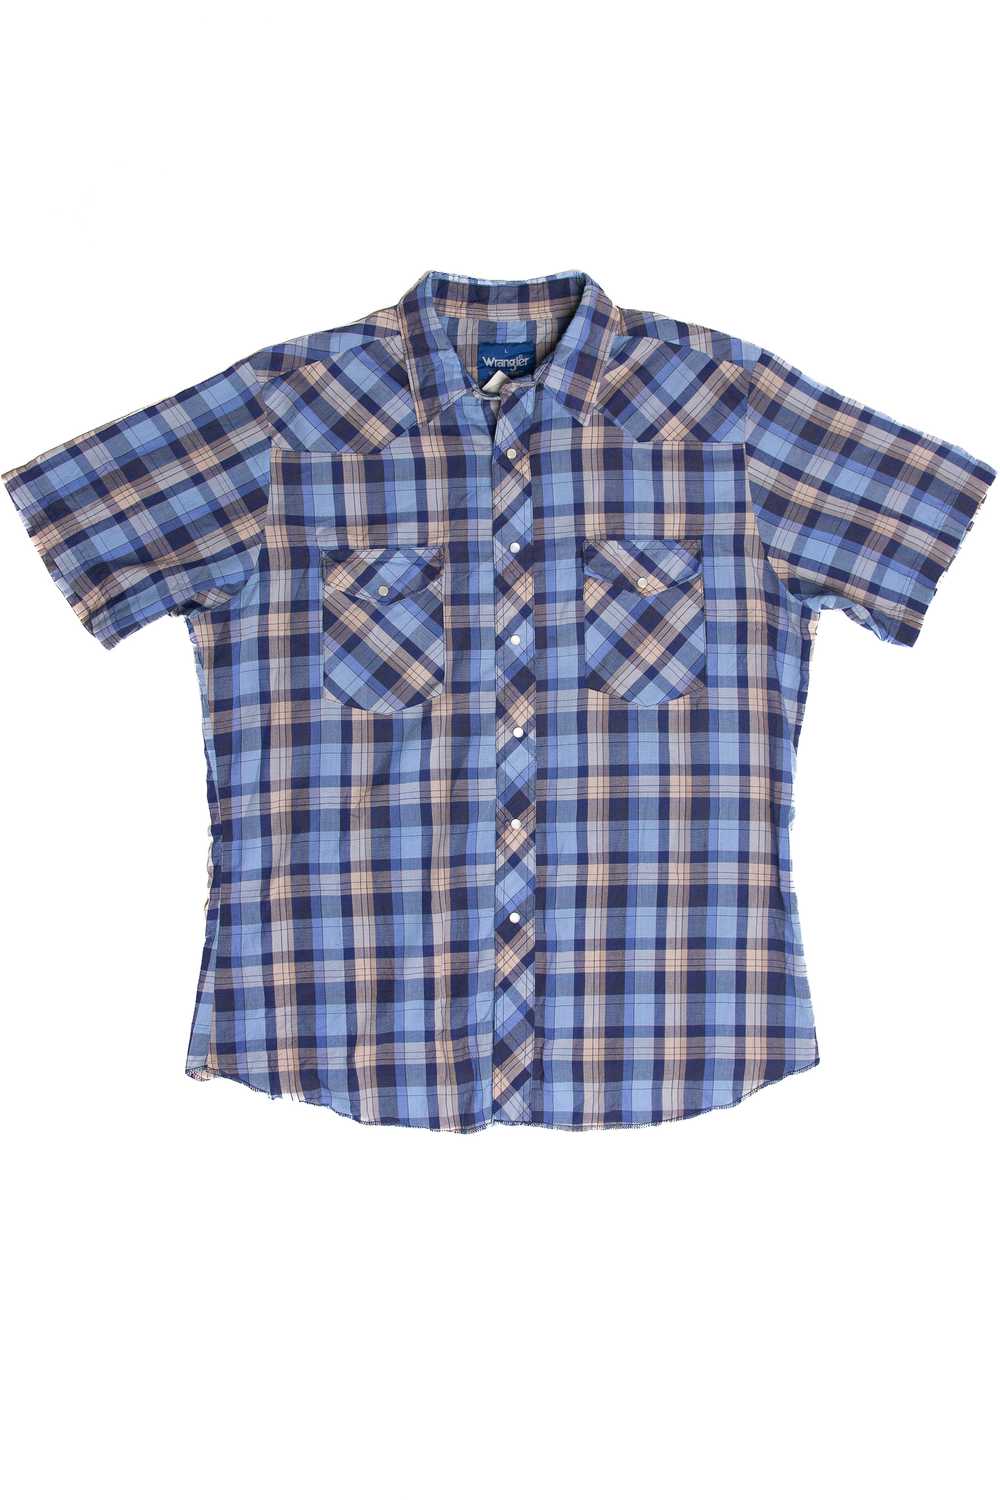 Recycled Wrangler Blue Button Up Shirt - image 1